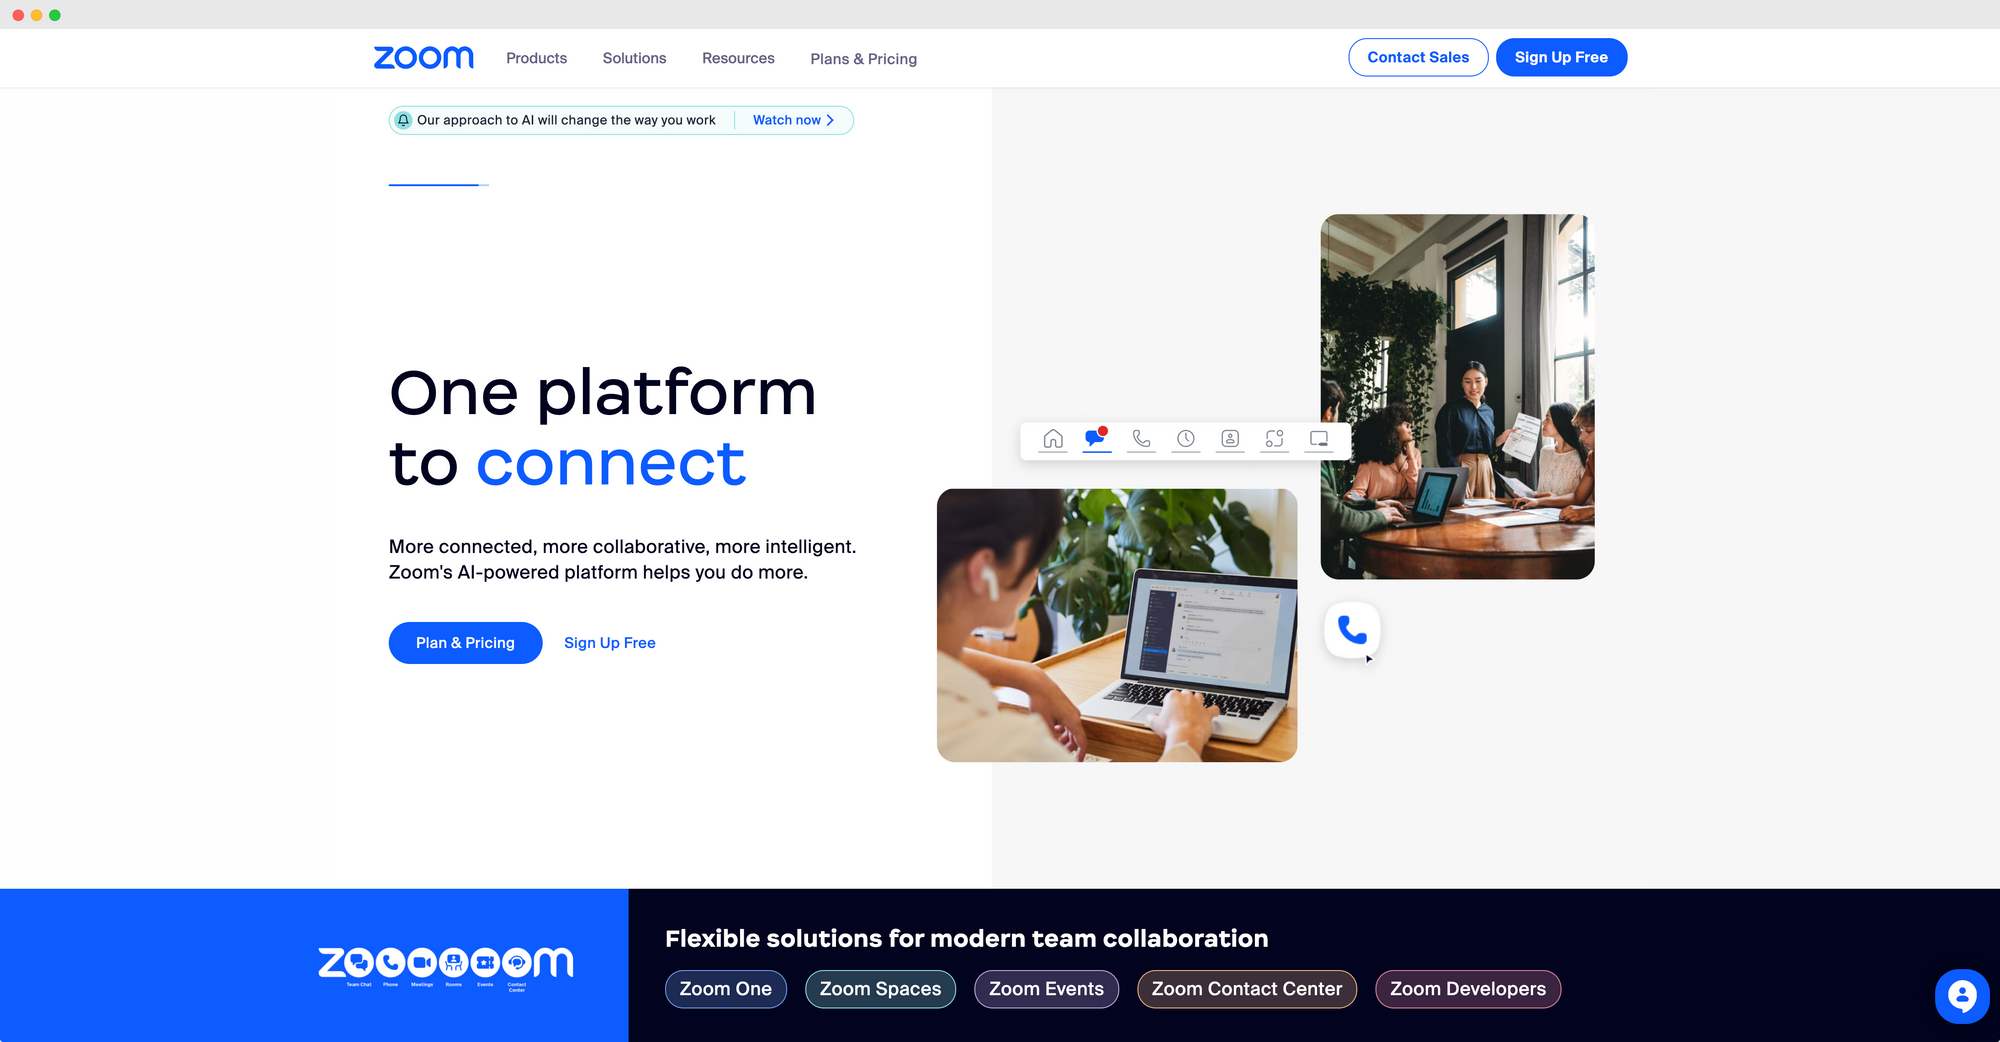 Zoom website's main page showing collaboration platform features